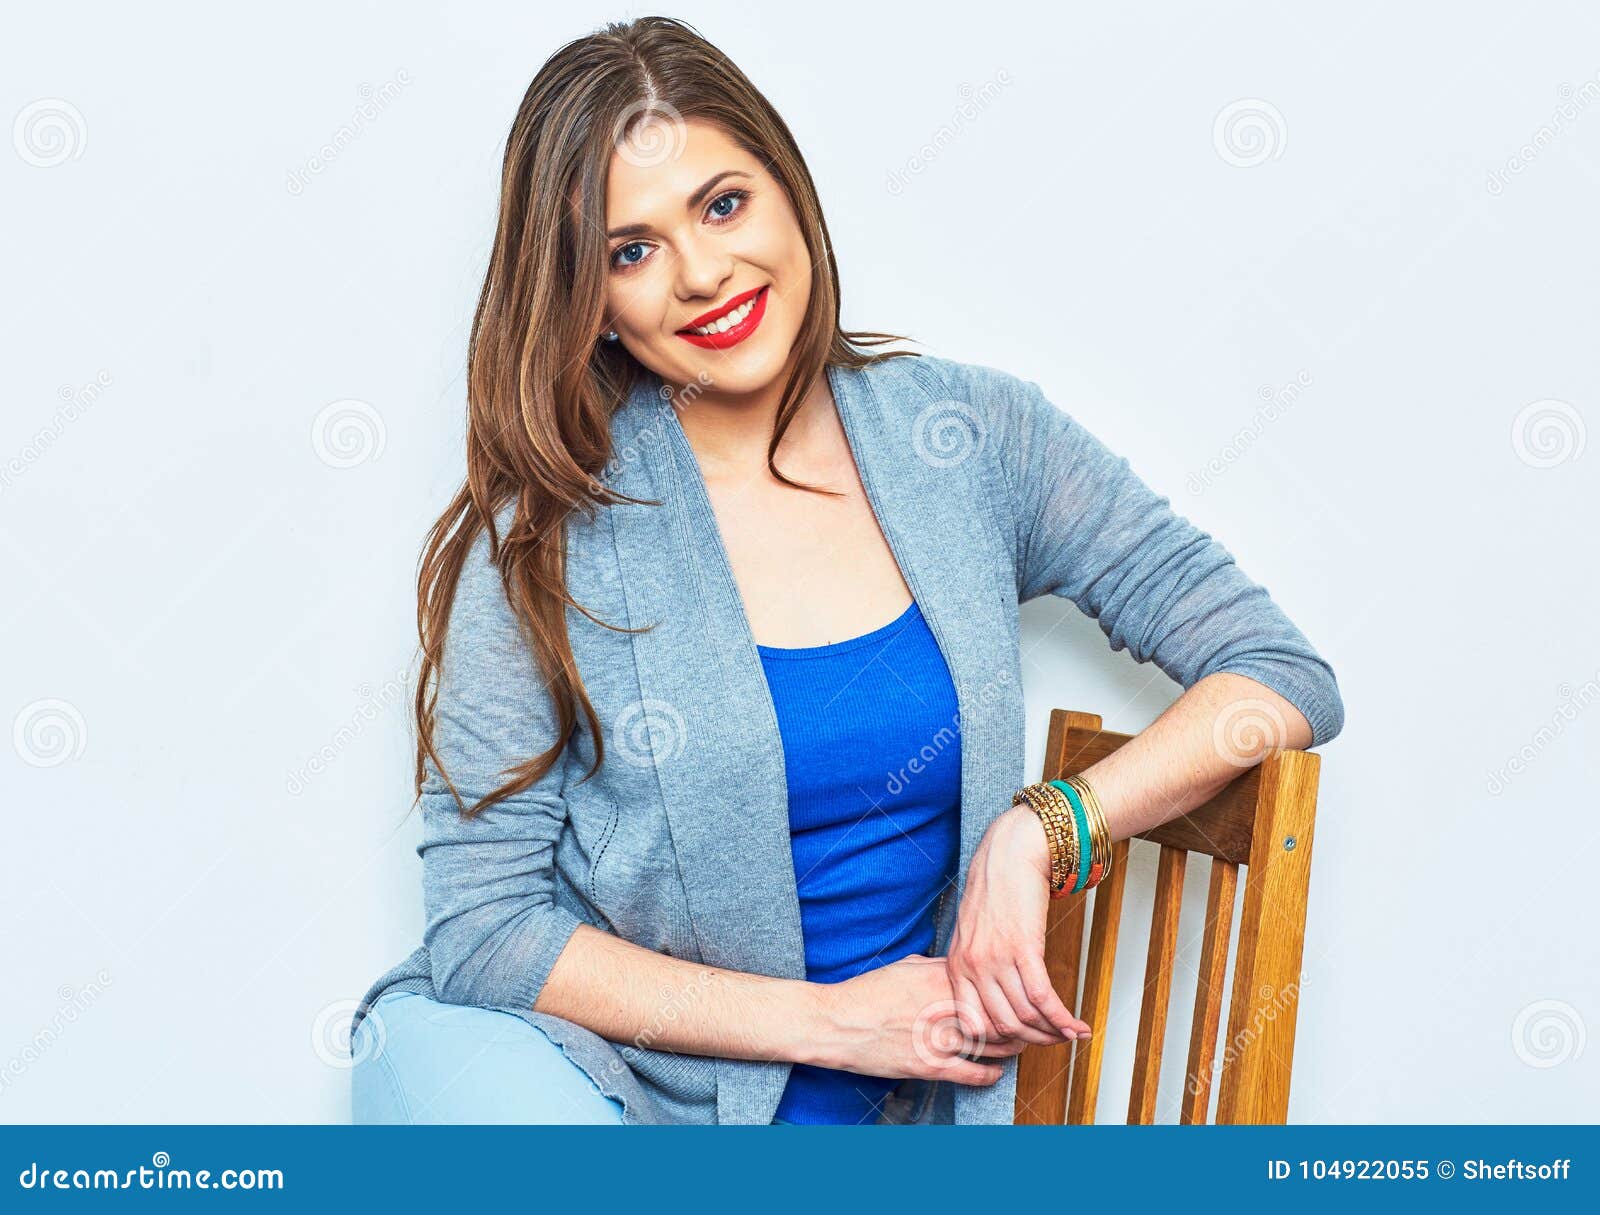 Smiling Woman Sitting on Chair. Young Model Stock Image - Image of ...